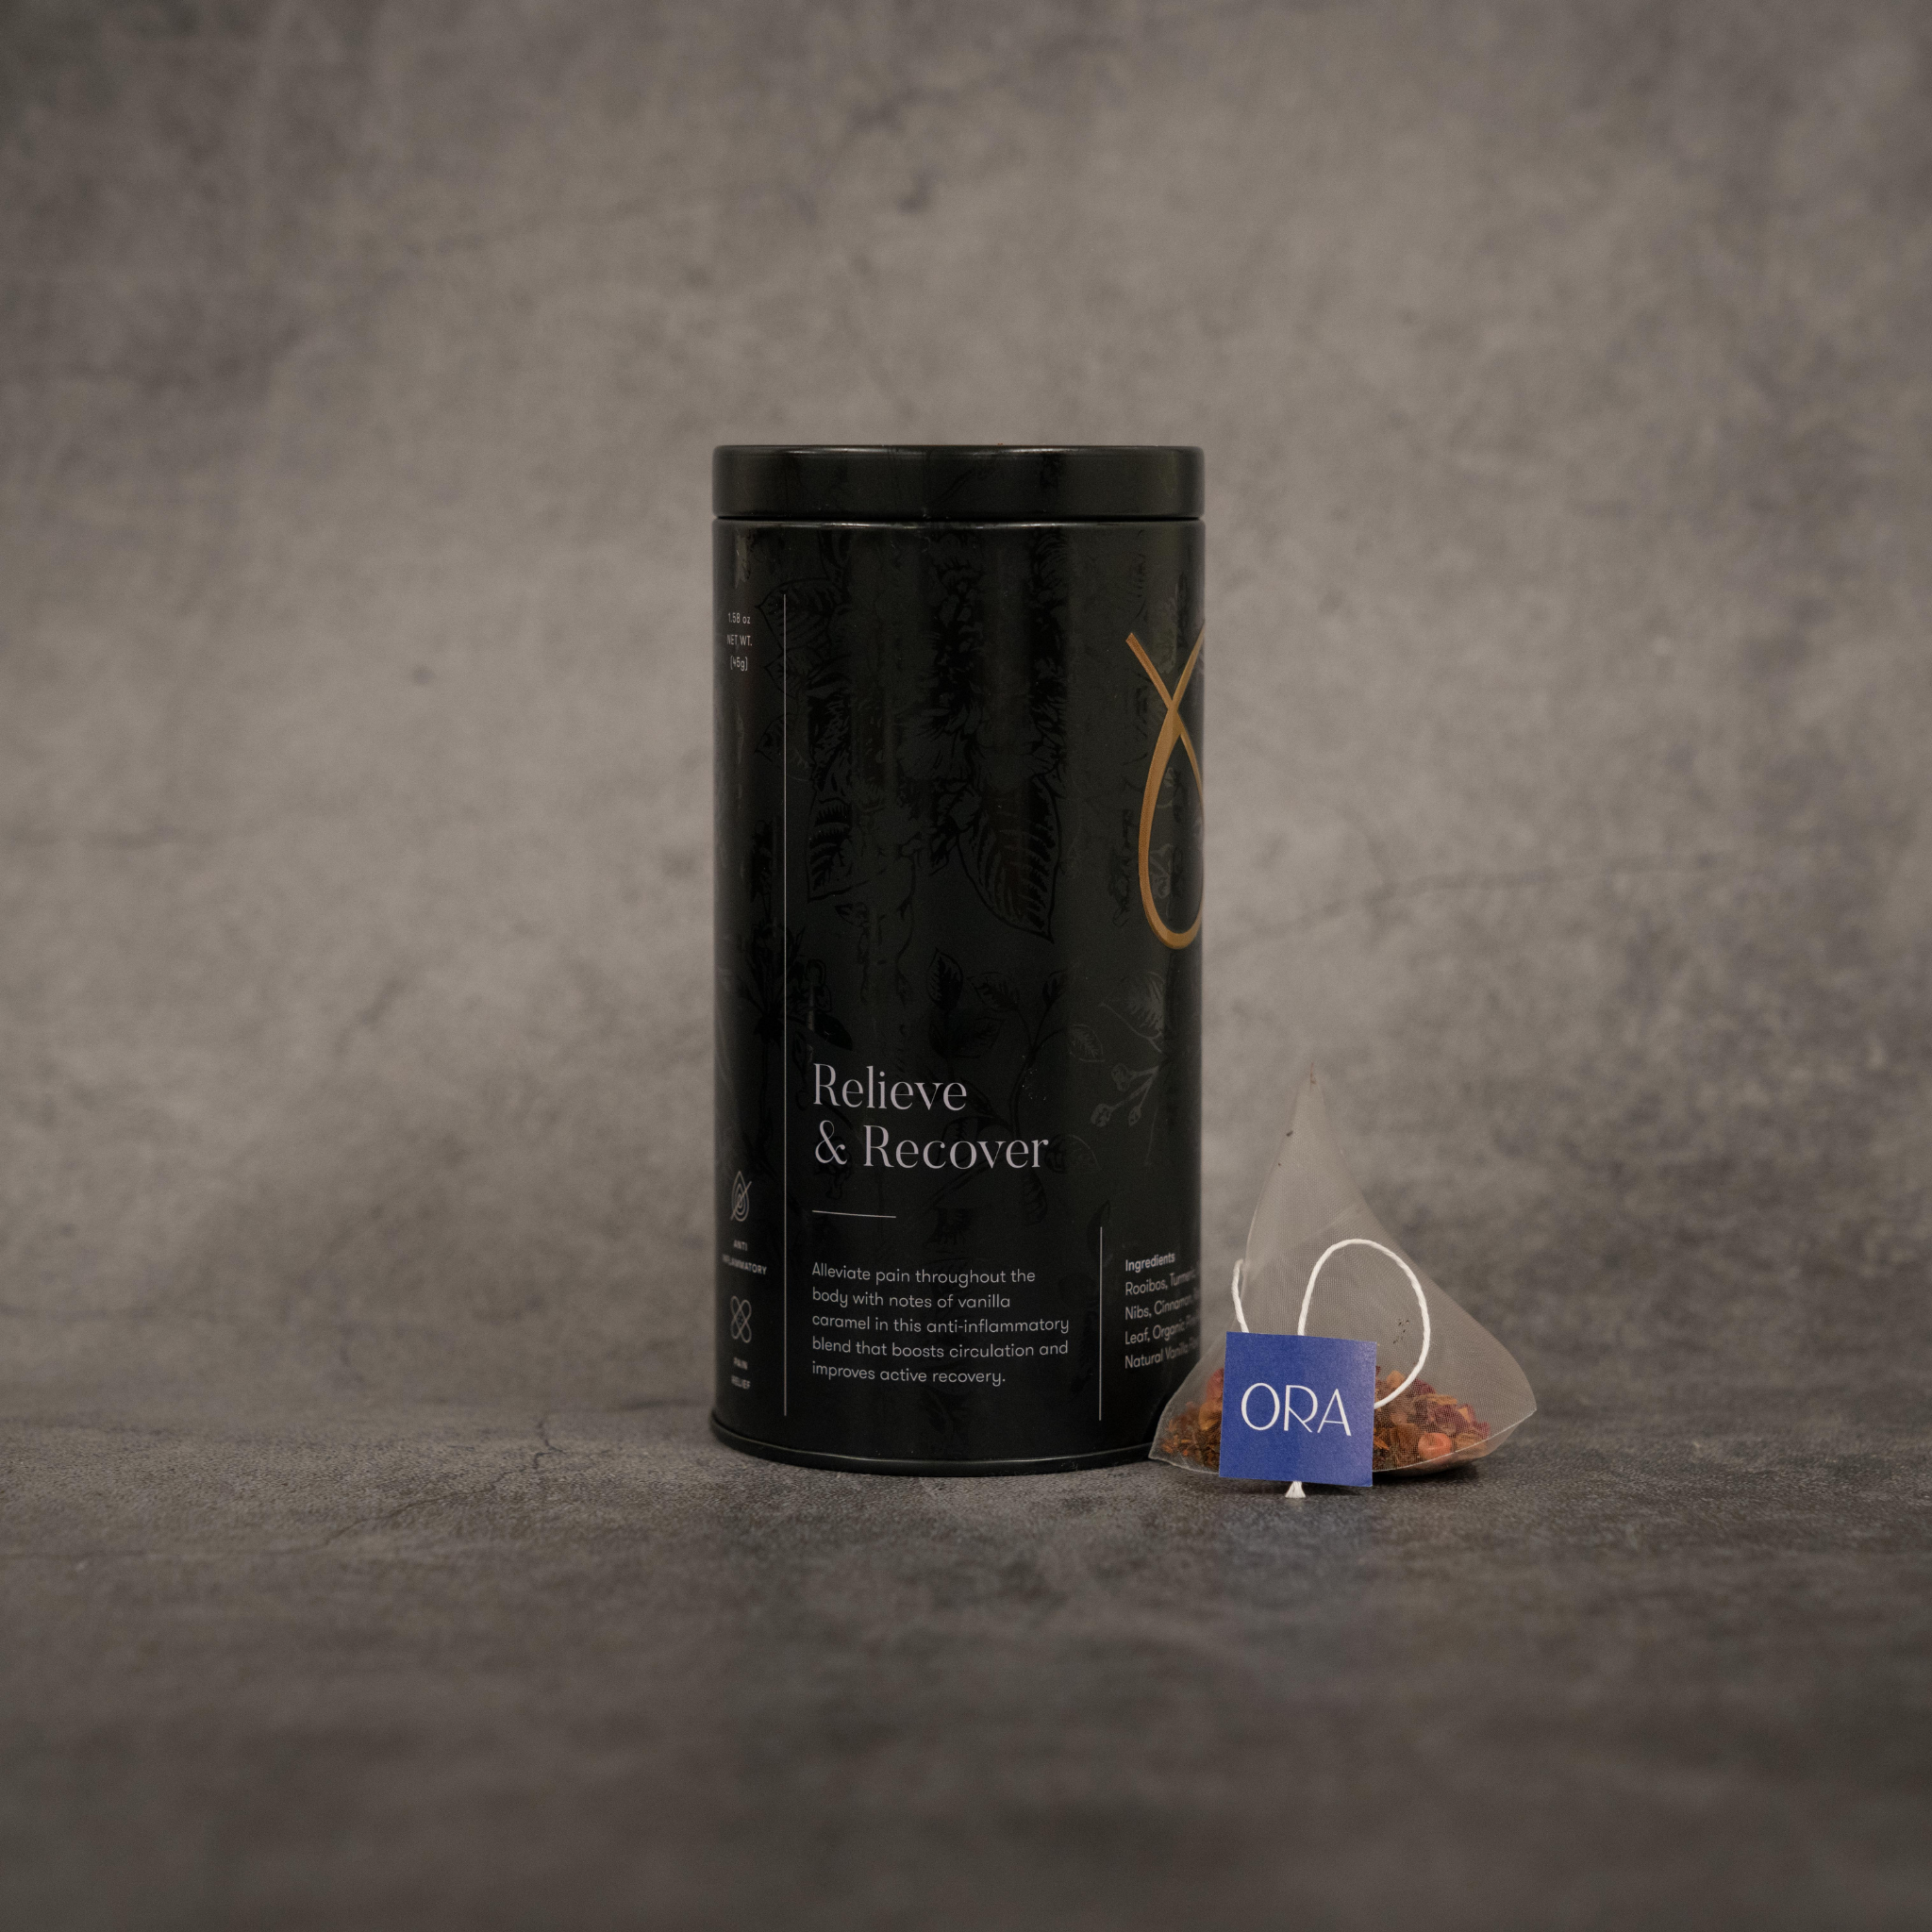 On the left, a black metal cylinder tin of tea reading "Relieve & Recover". On the right, a translucent tea bag with a string printed with the ORA logo.